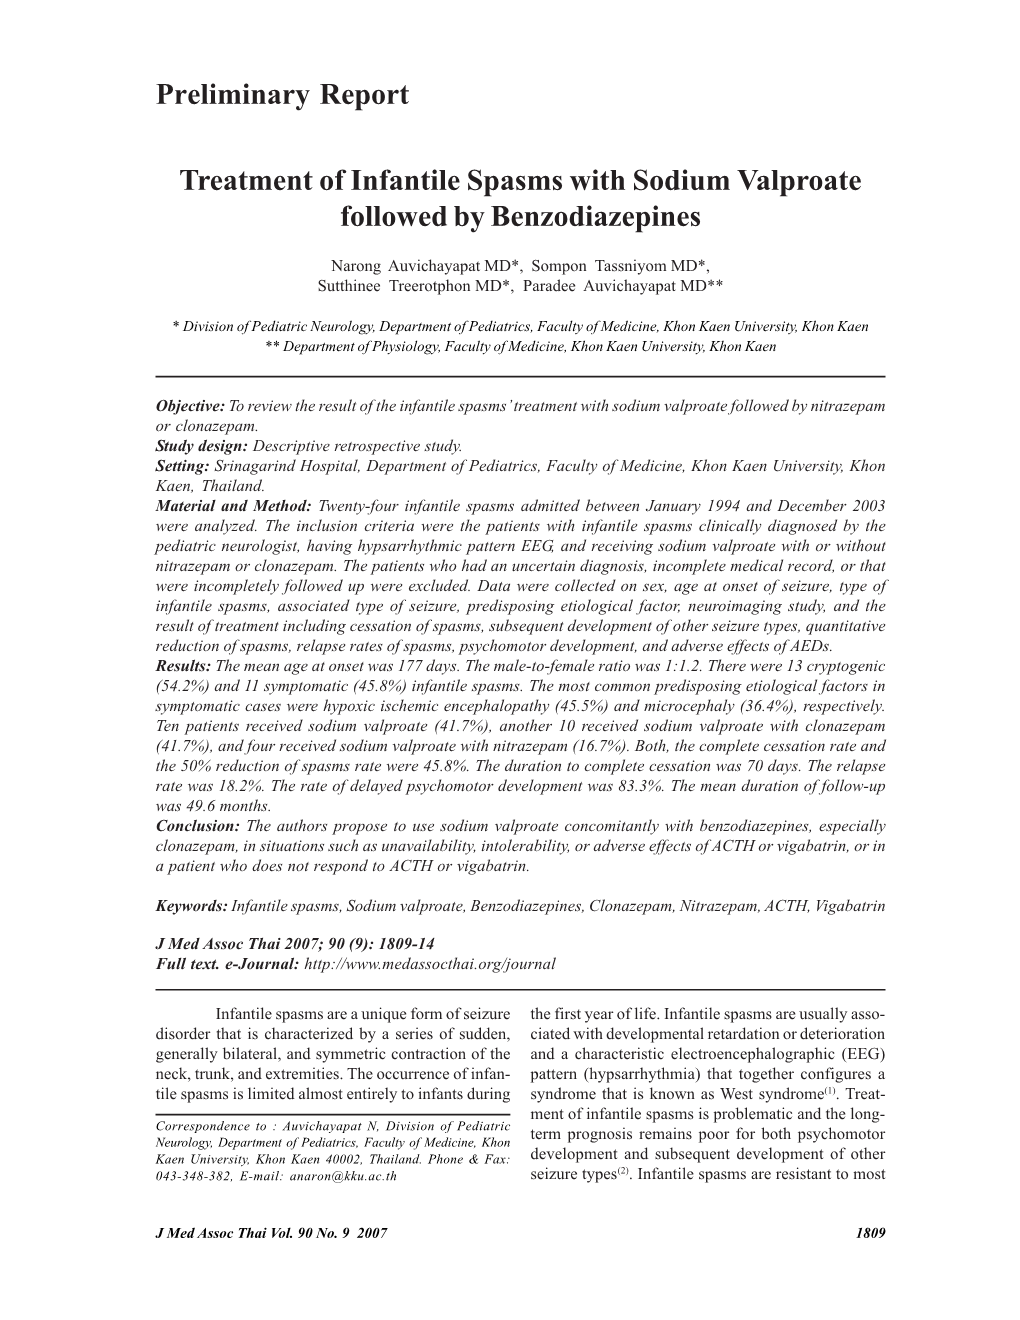 Preliminary Report Treatment of Infantile Spasms with Sodium Valproate Followed by Benzodiazepines